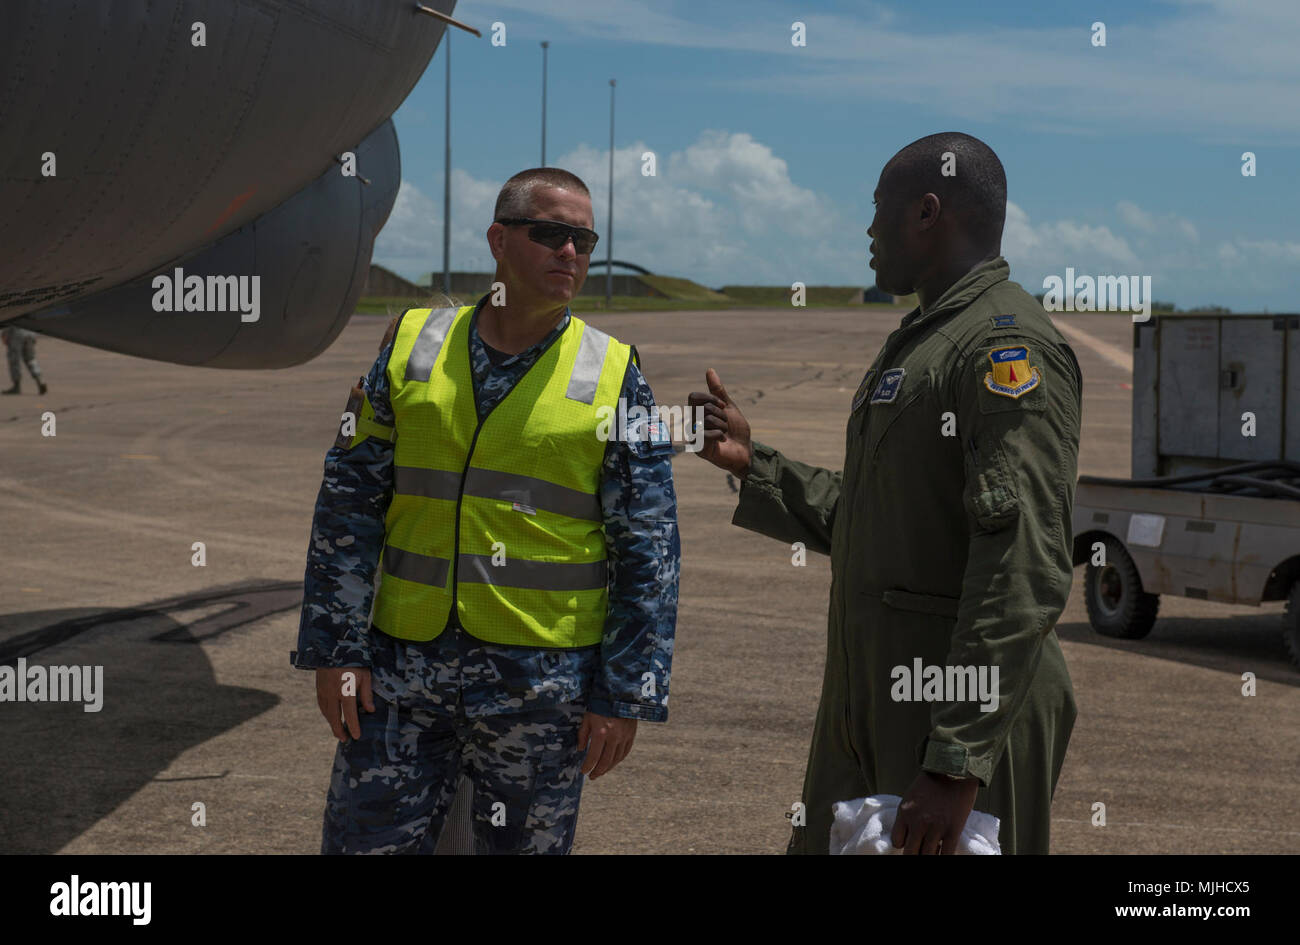 U.S. Air Force Capt. Joseph Okai Jr., 20th Expeditionary Bomb Squadron B-52H Stratofortress pilot, (right) explains features of the bomber to a member of the Royal Australian Air Force (RAAF) at RAAF Base Darwin, Australia, April 4, 2018. A detachment of U.S. Air Force B-52H bombers, aircrew and support personnel deployed to RAAF Darwin to train and increase interoperability with Australian joint terminal attack controllers as part of the U.S. Force Posture Initiatives’ Enhanced Air Cooperation program, which builds on air exercises and training between the two air forces. The bombers are curr Stock Photo